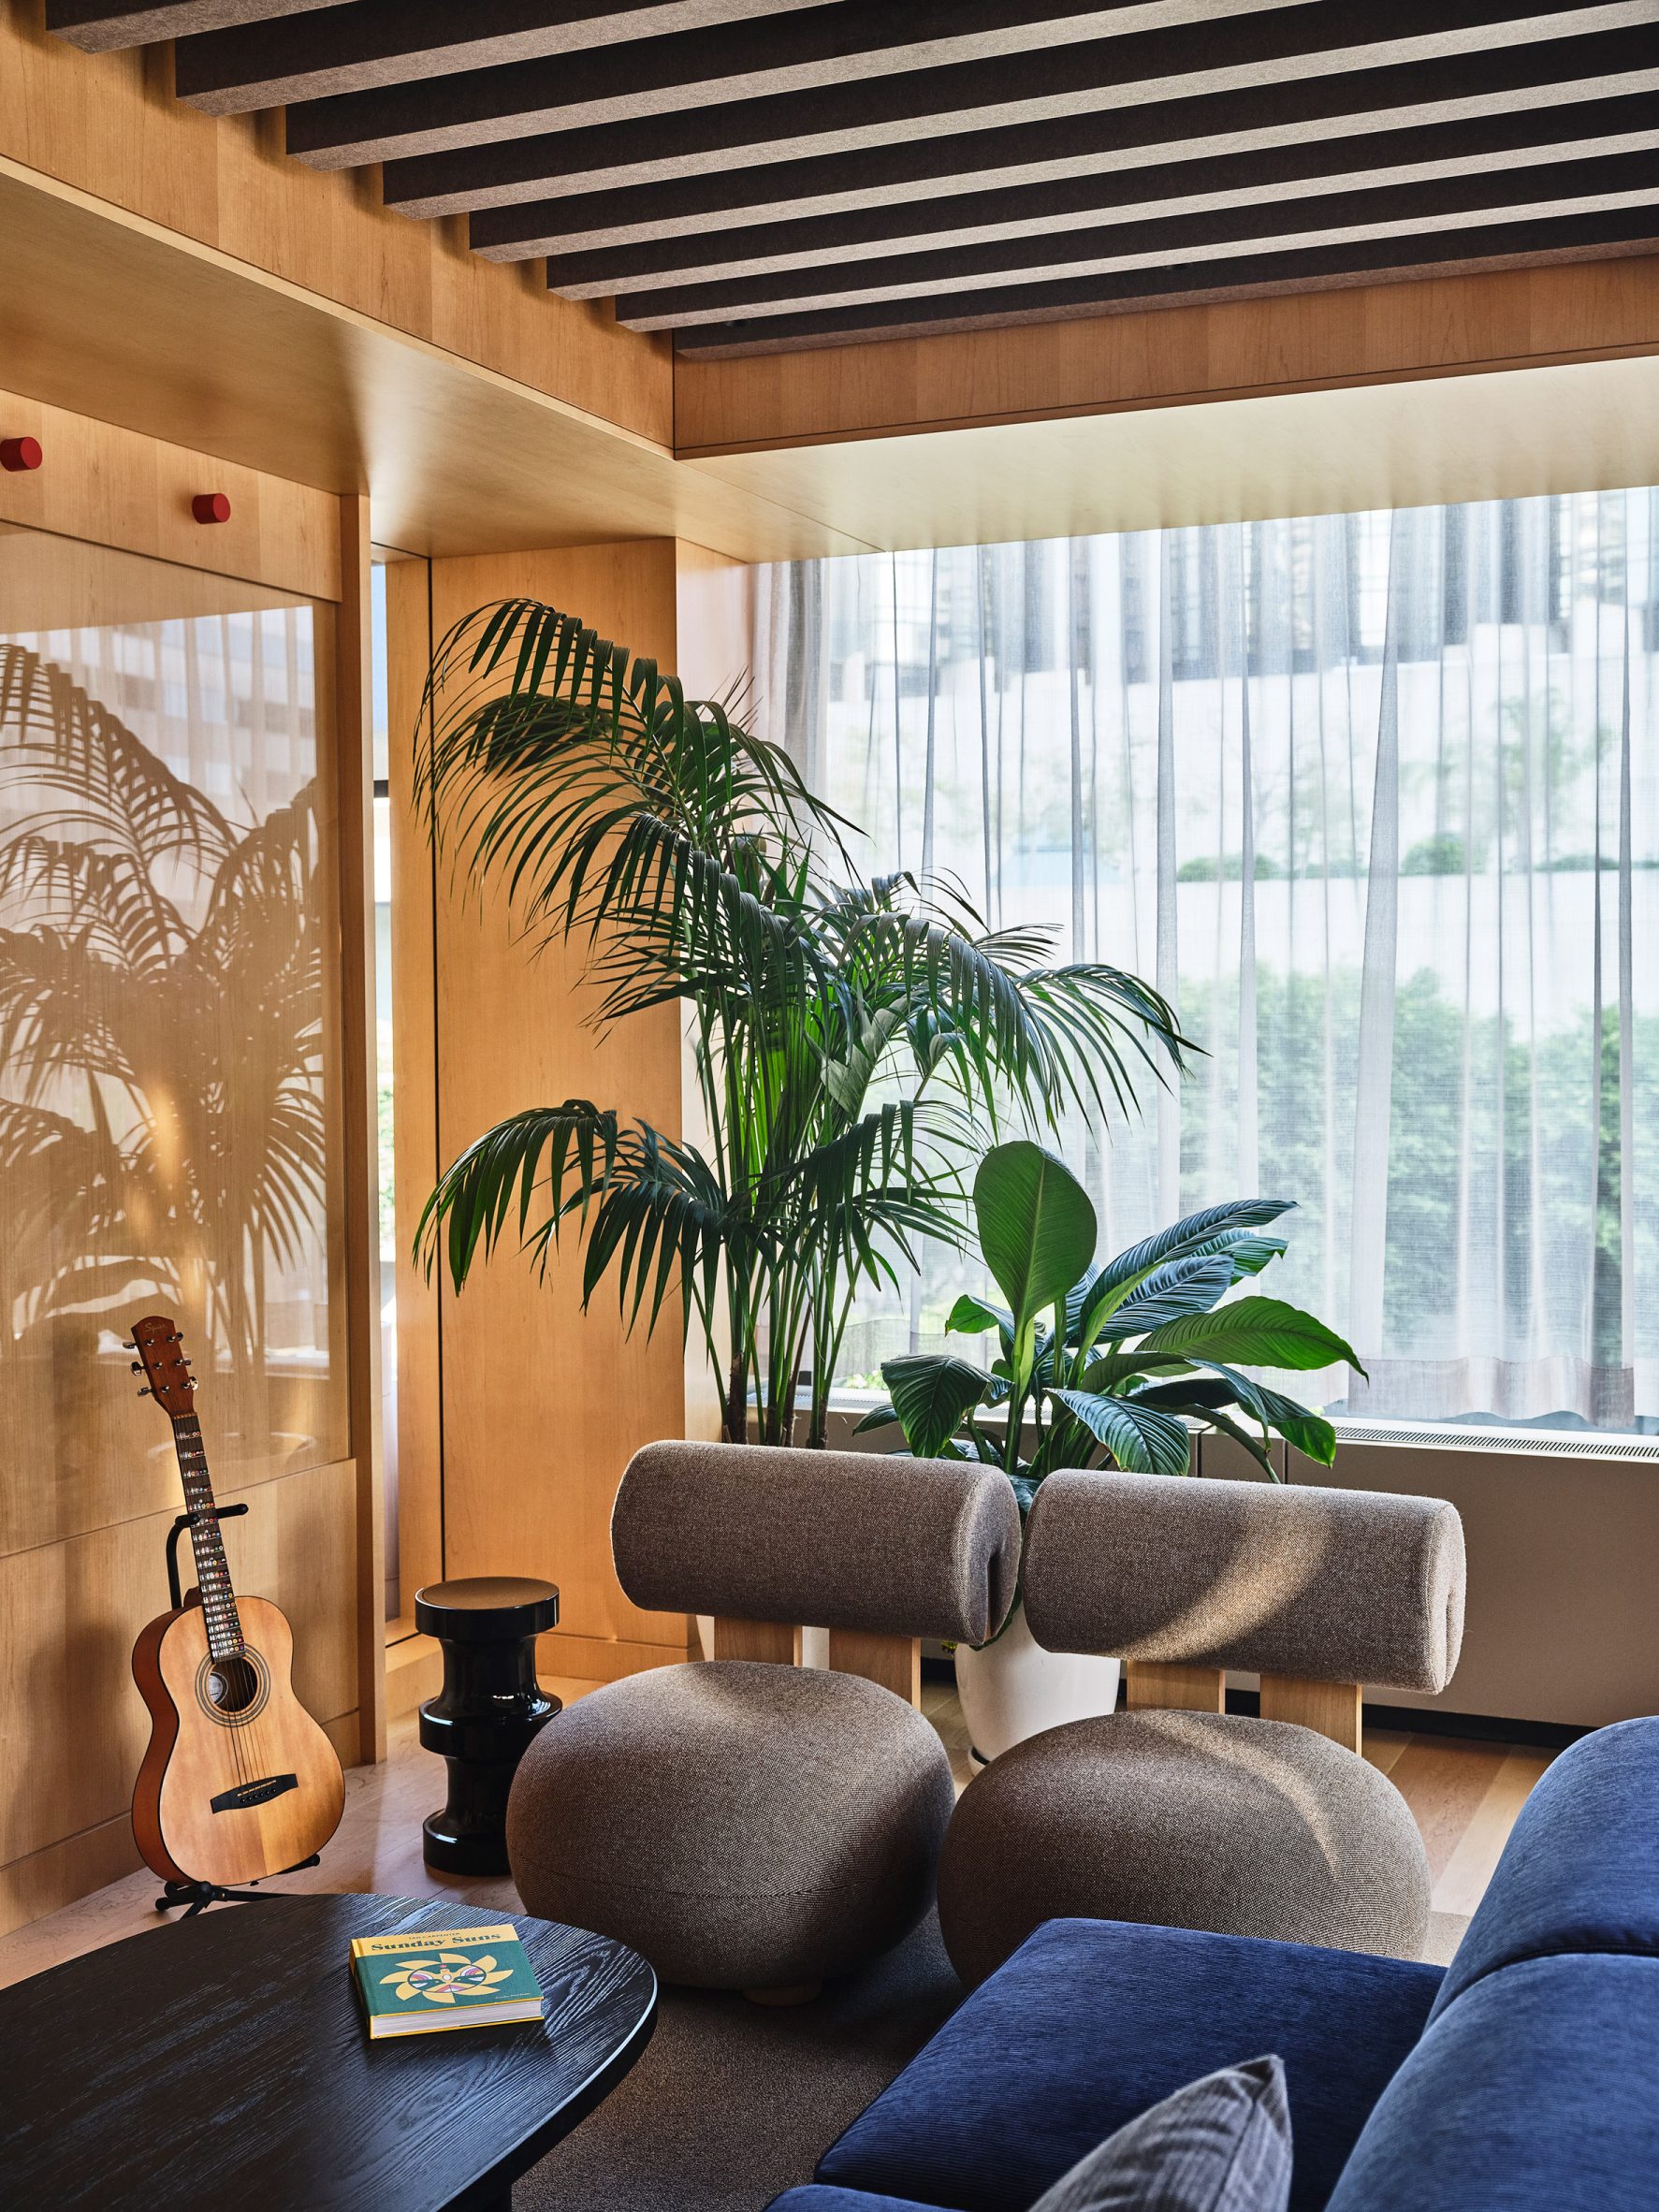 Lounge area with comfy seating, plants and a guitar